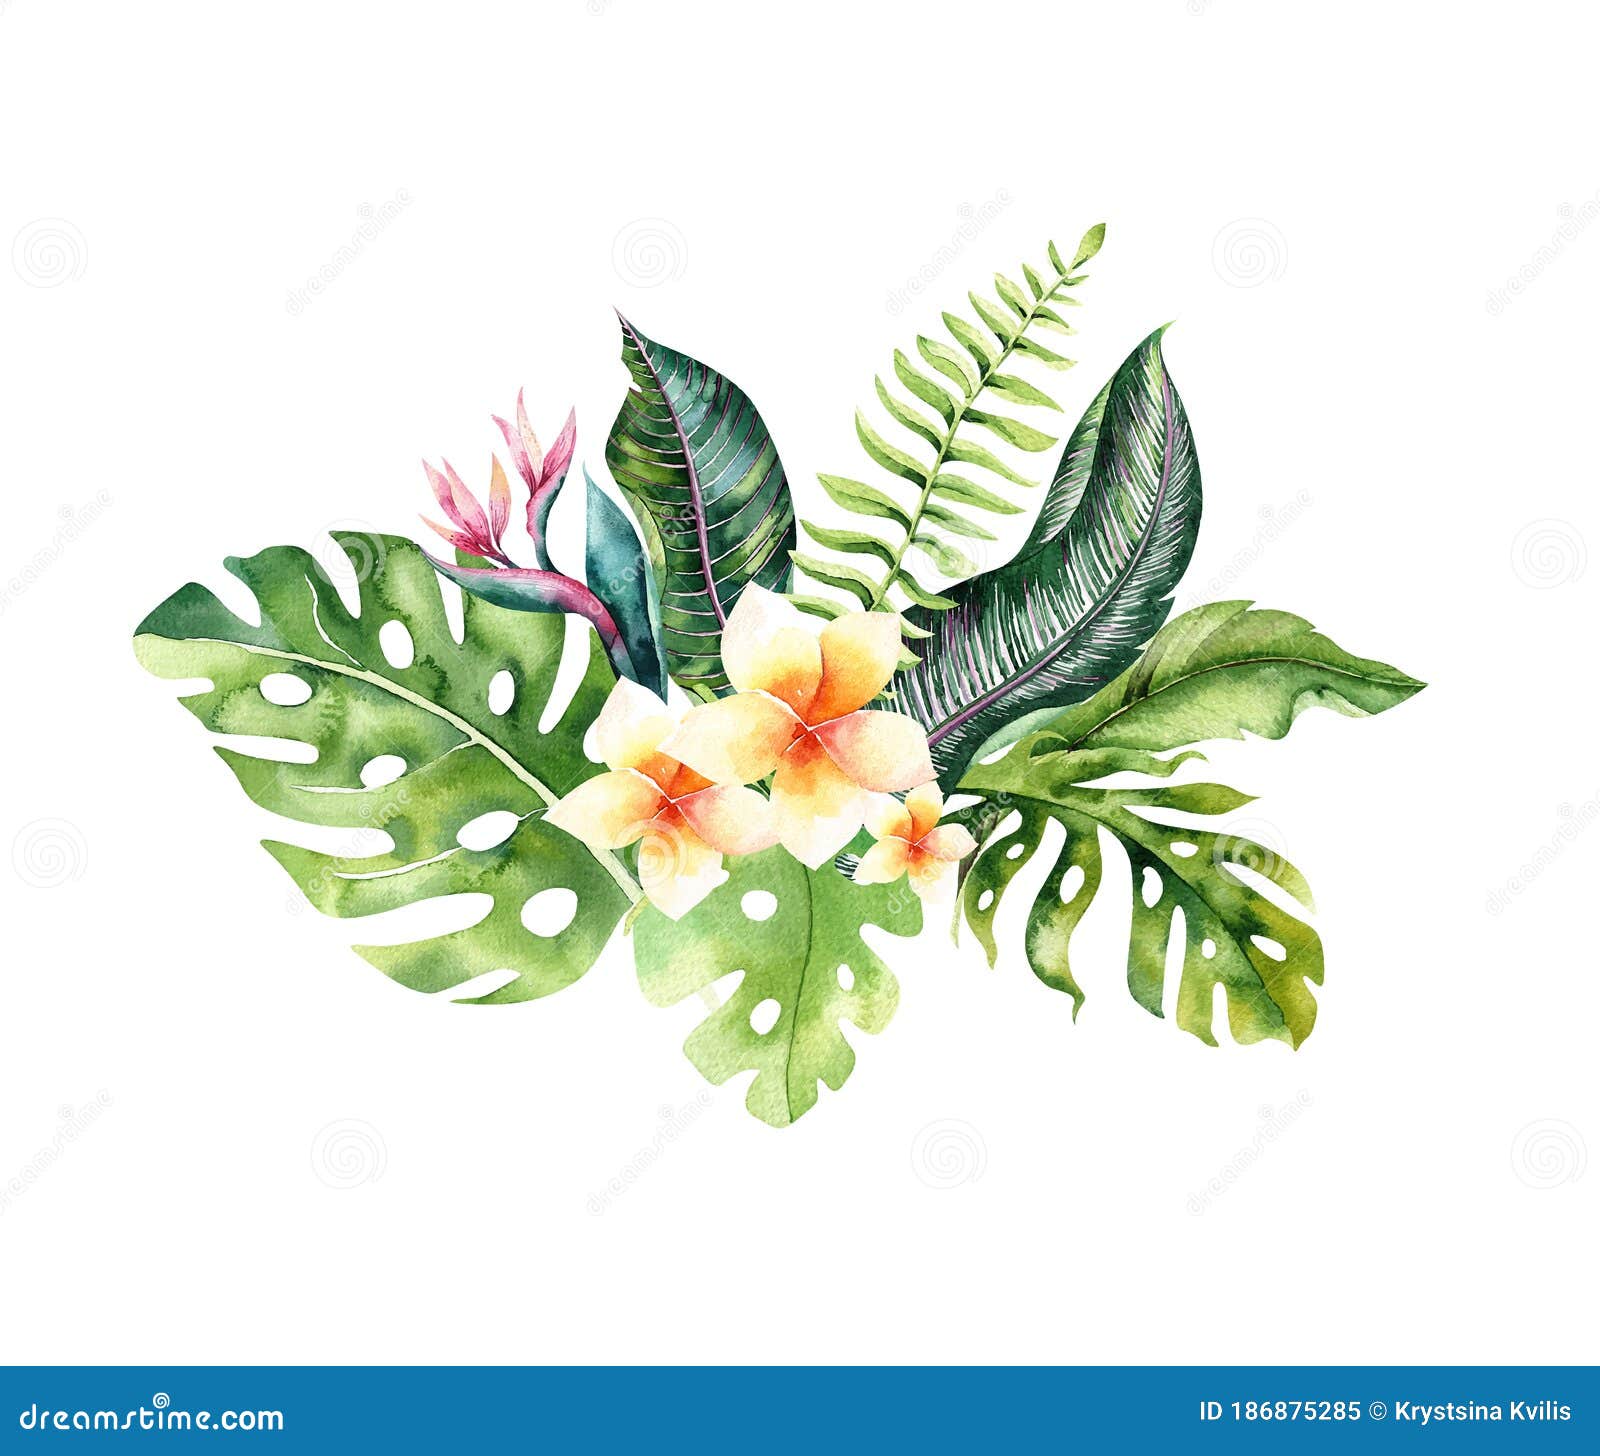 hand drawn watercolor tropical flower bouquets. exotic palm leaves, jungle tree, brazil tropic botany s and